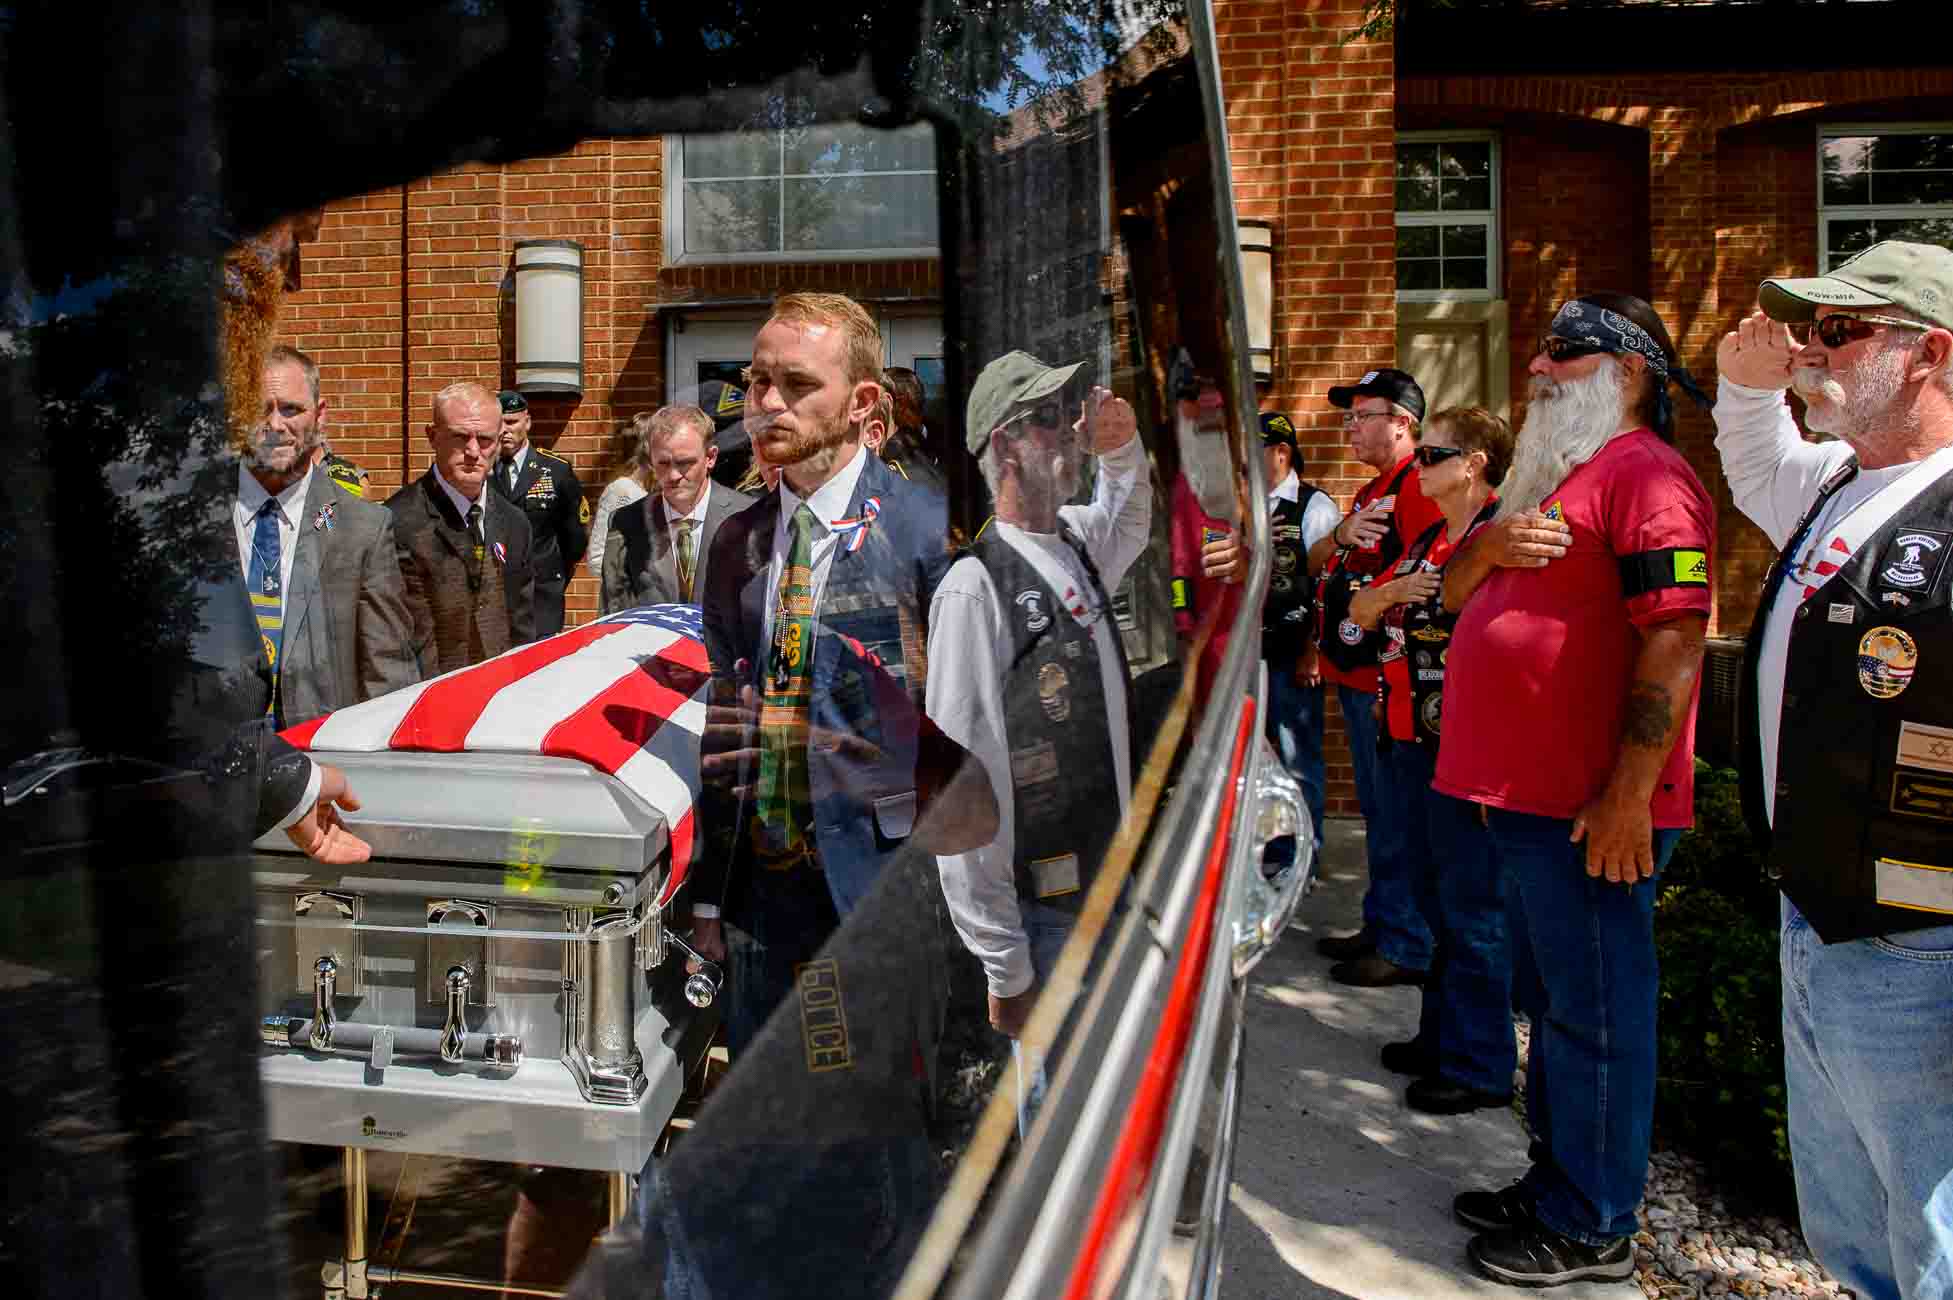 (Trent Nelson | The Salt Lake Tribune)  Pallbearers at the funeral for fallen soldier Aaron Butler, in Monticello Saturday August 26, 2017. At right are members of the Patriot Guard Riders.